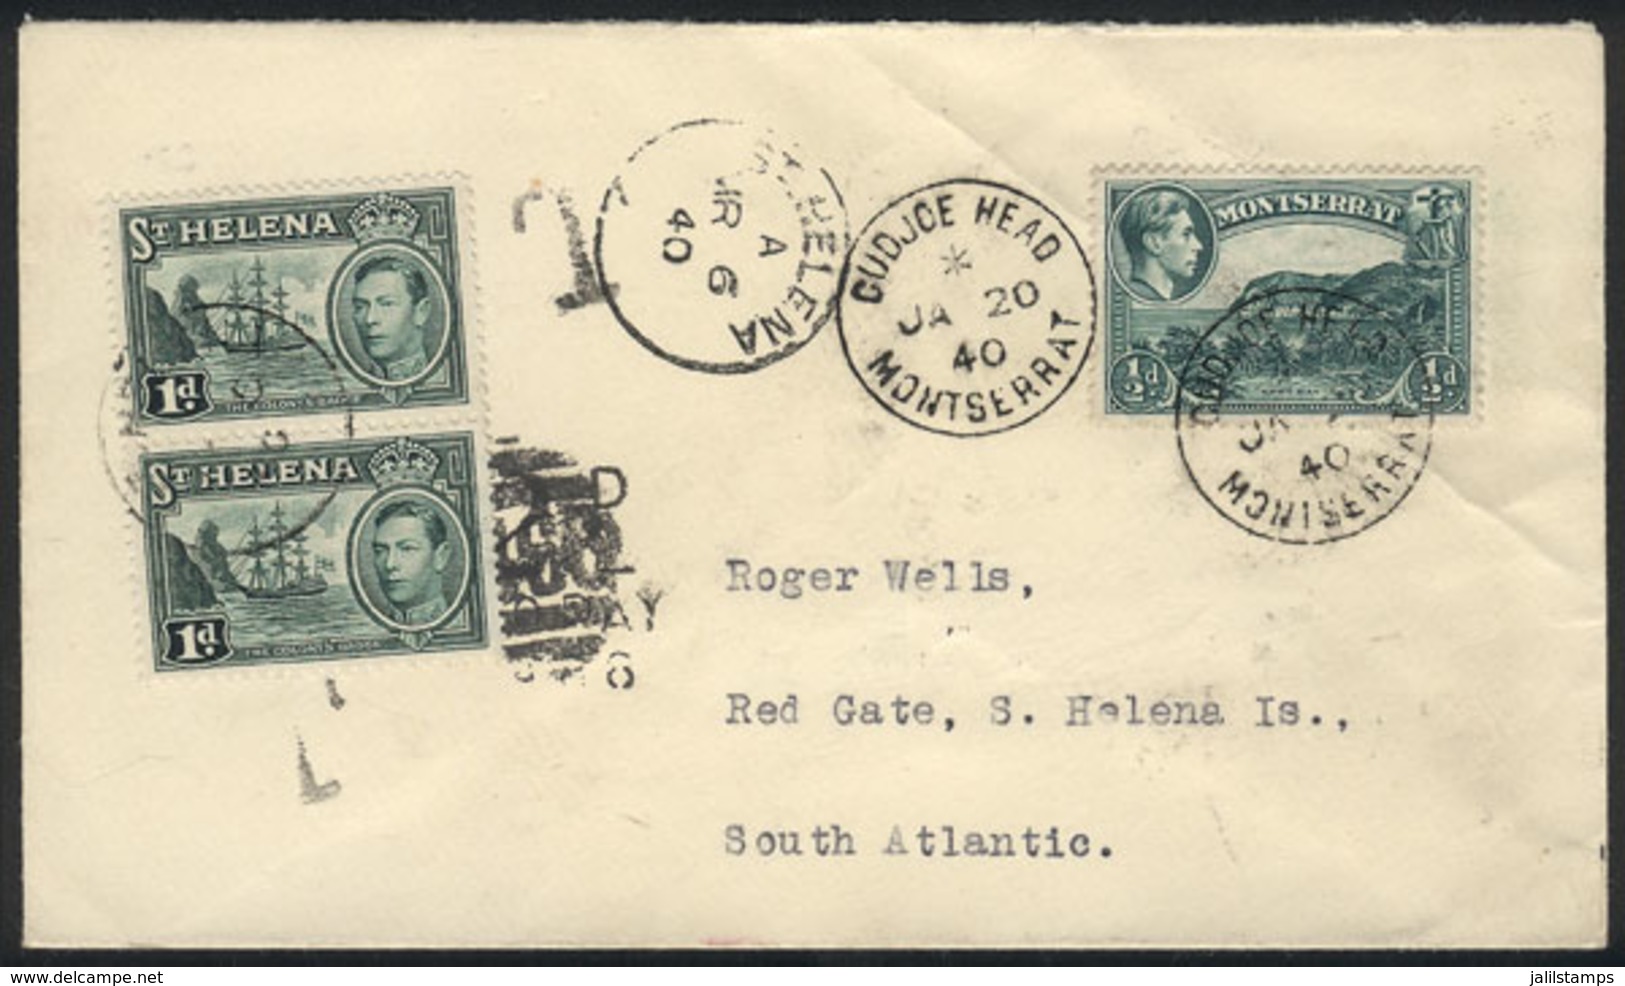 SAINT HELENA: Stamps Used As POSTAGE DUE STAMPS: Cover Sent From Gudjoe Head (Montserrat) To Red Gate, Saint Helena, On  - Isola Di Sant'Elena